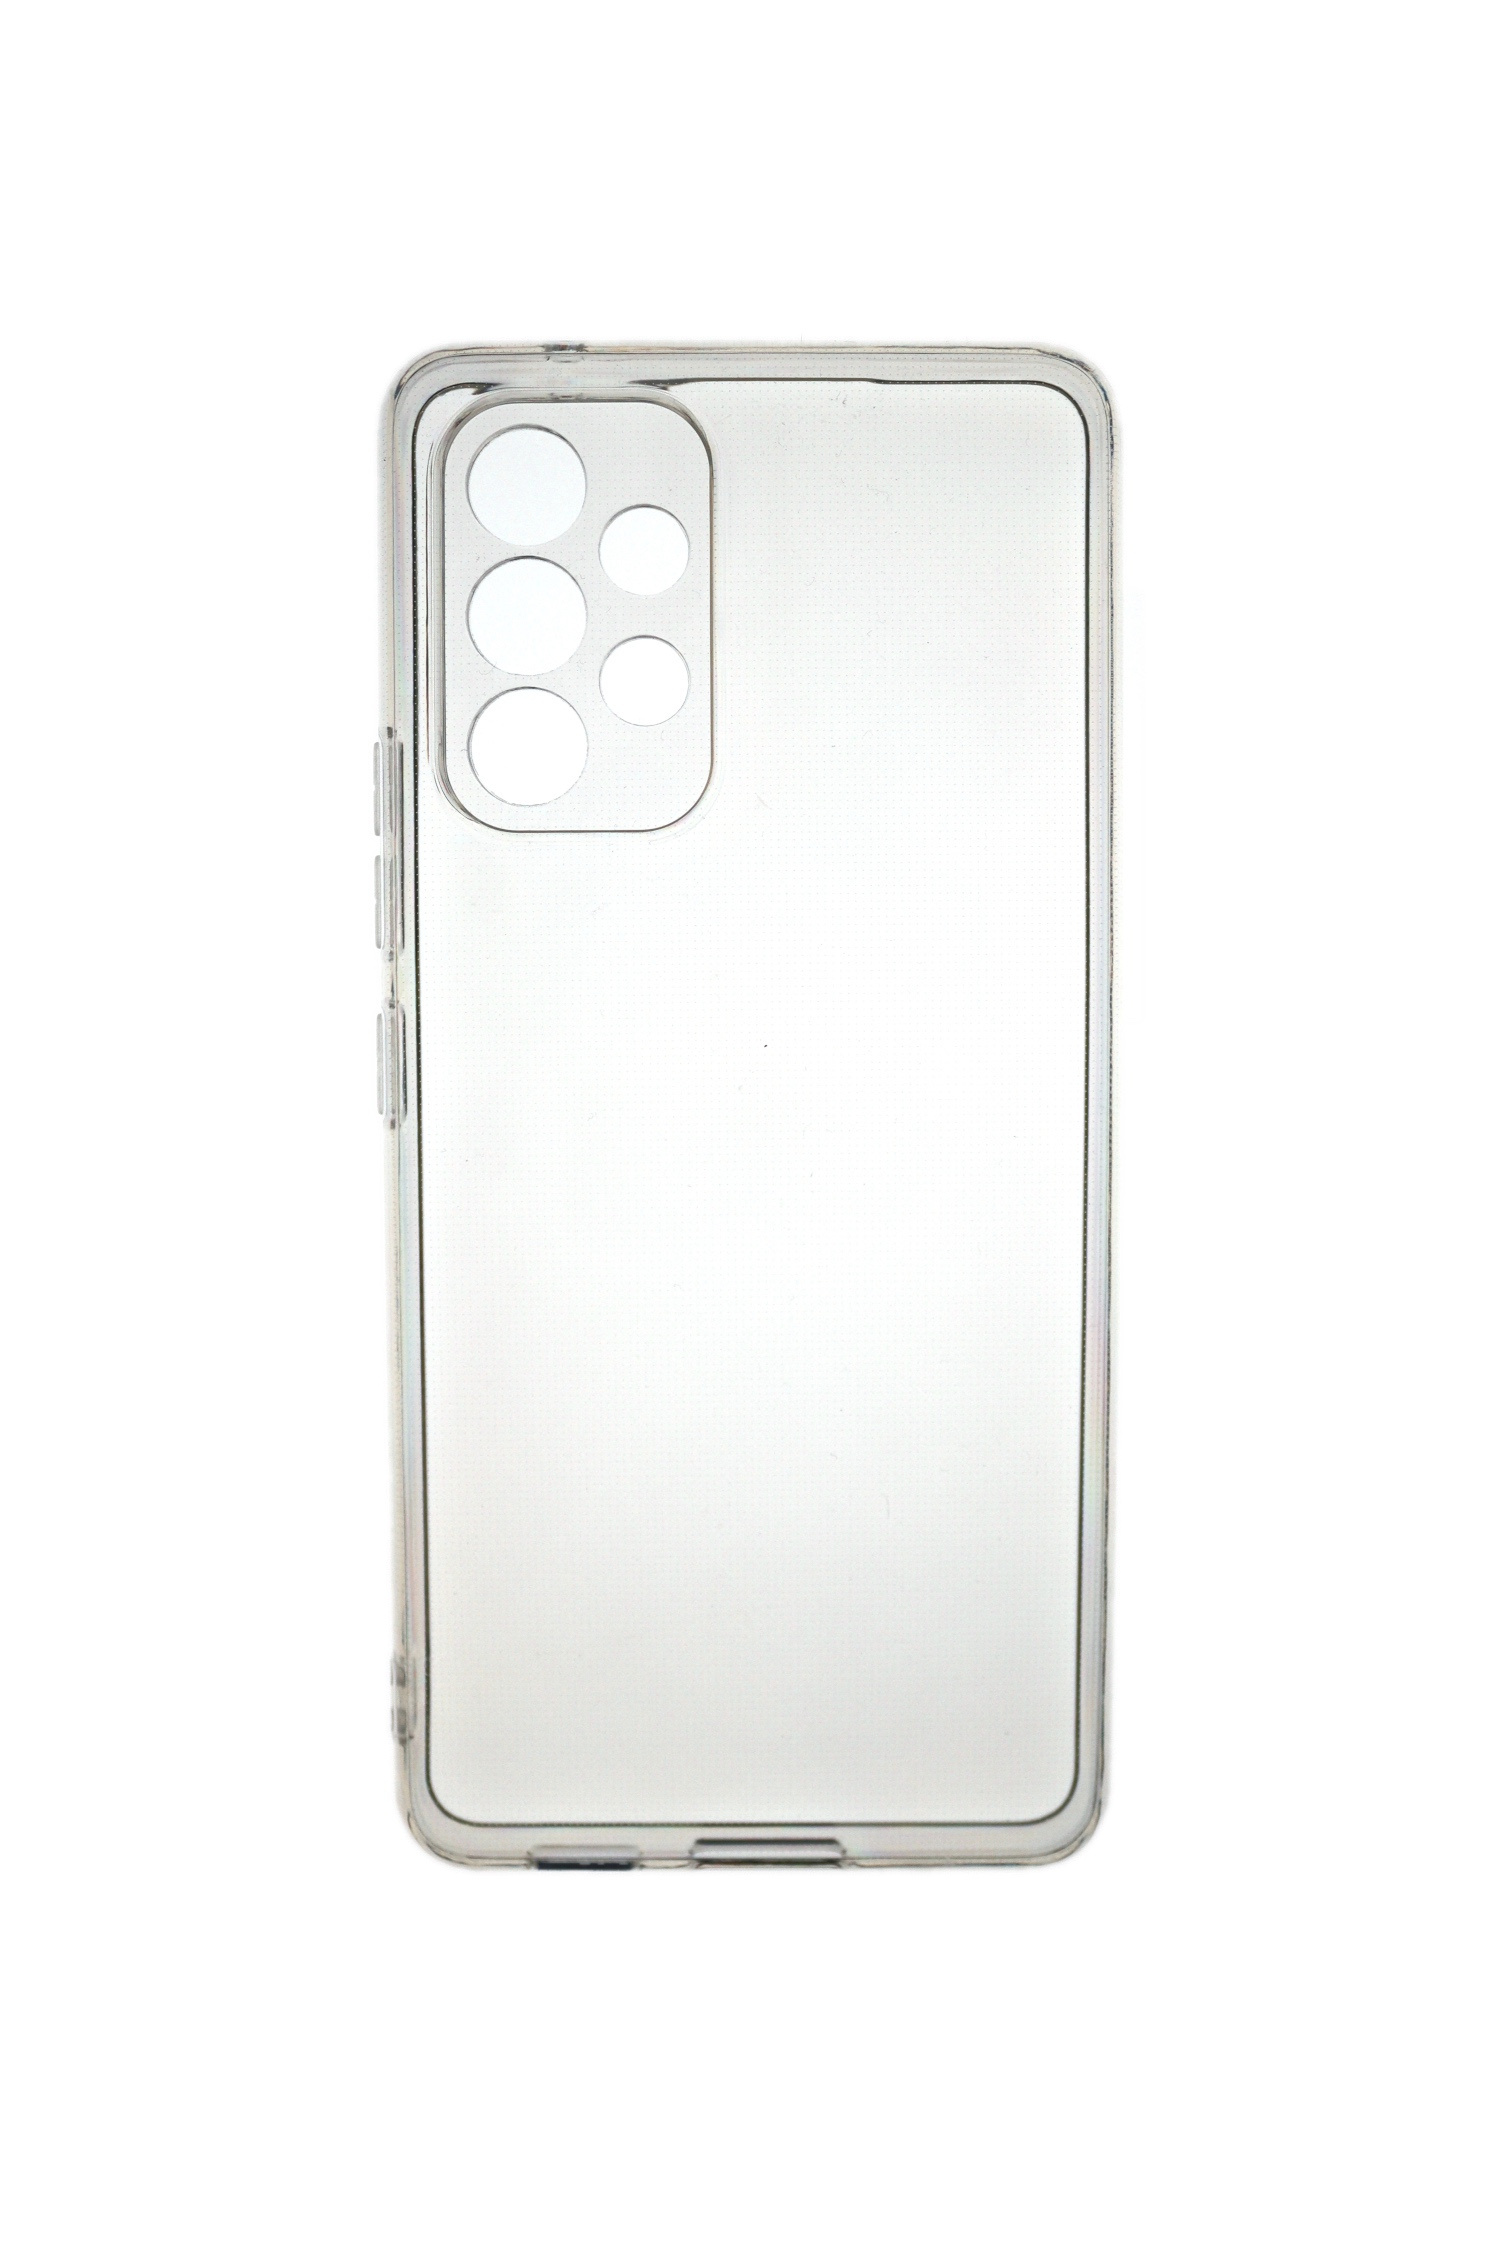 TPU Transparent A53 Backcover, Strong Samsung, II, mm Galaxy 2.0 JAMCOVER Case 5G,